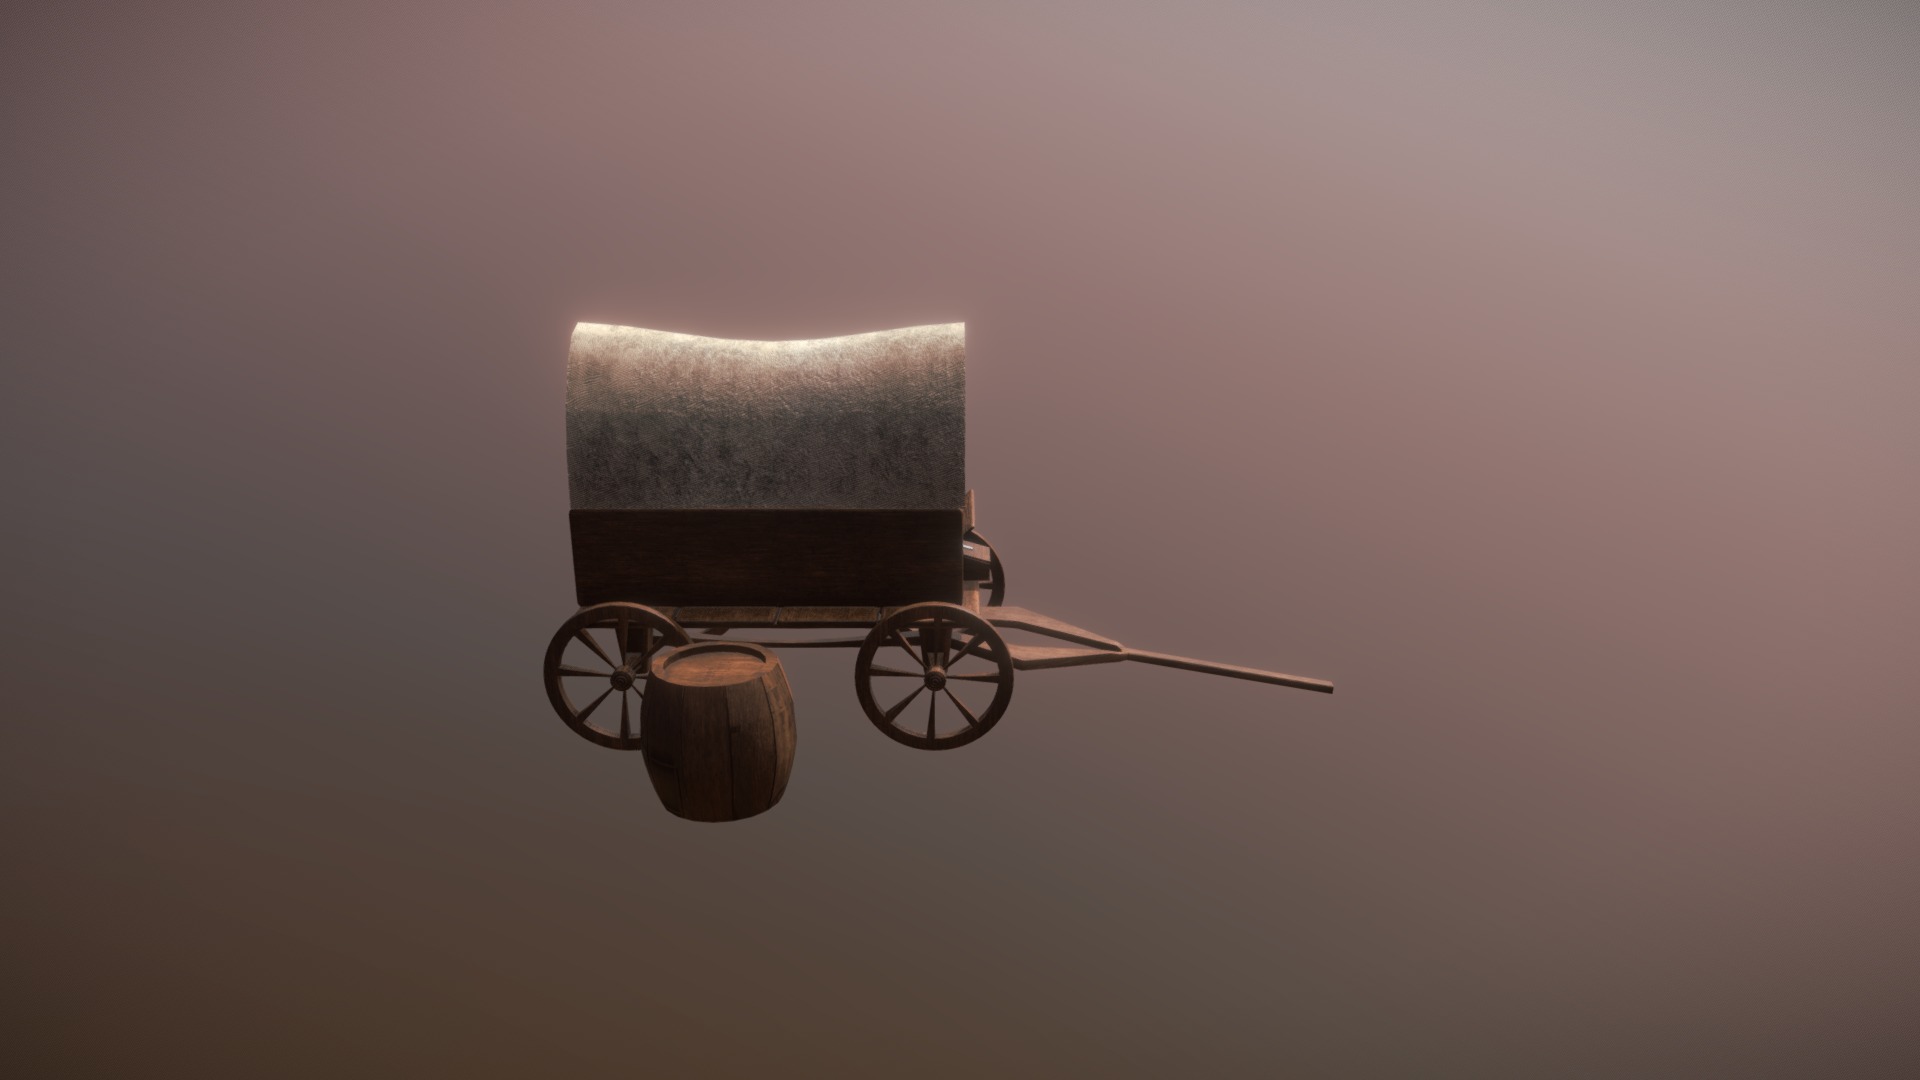 3D model Farmer kart - This is a 3D model of the Farmer kart. The 3D model is about a chair with a lamp on it.